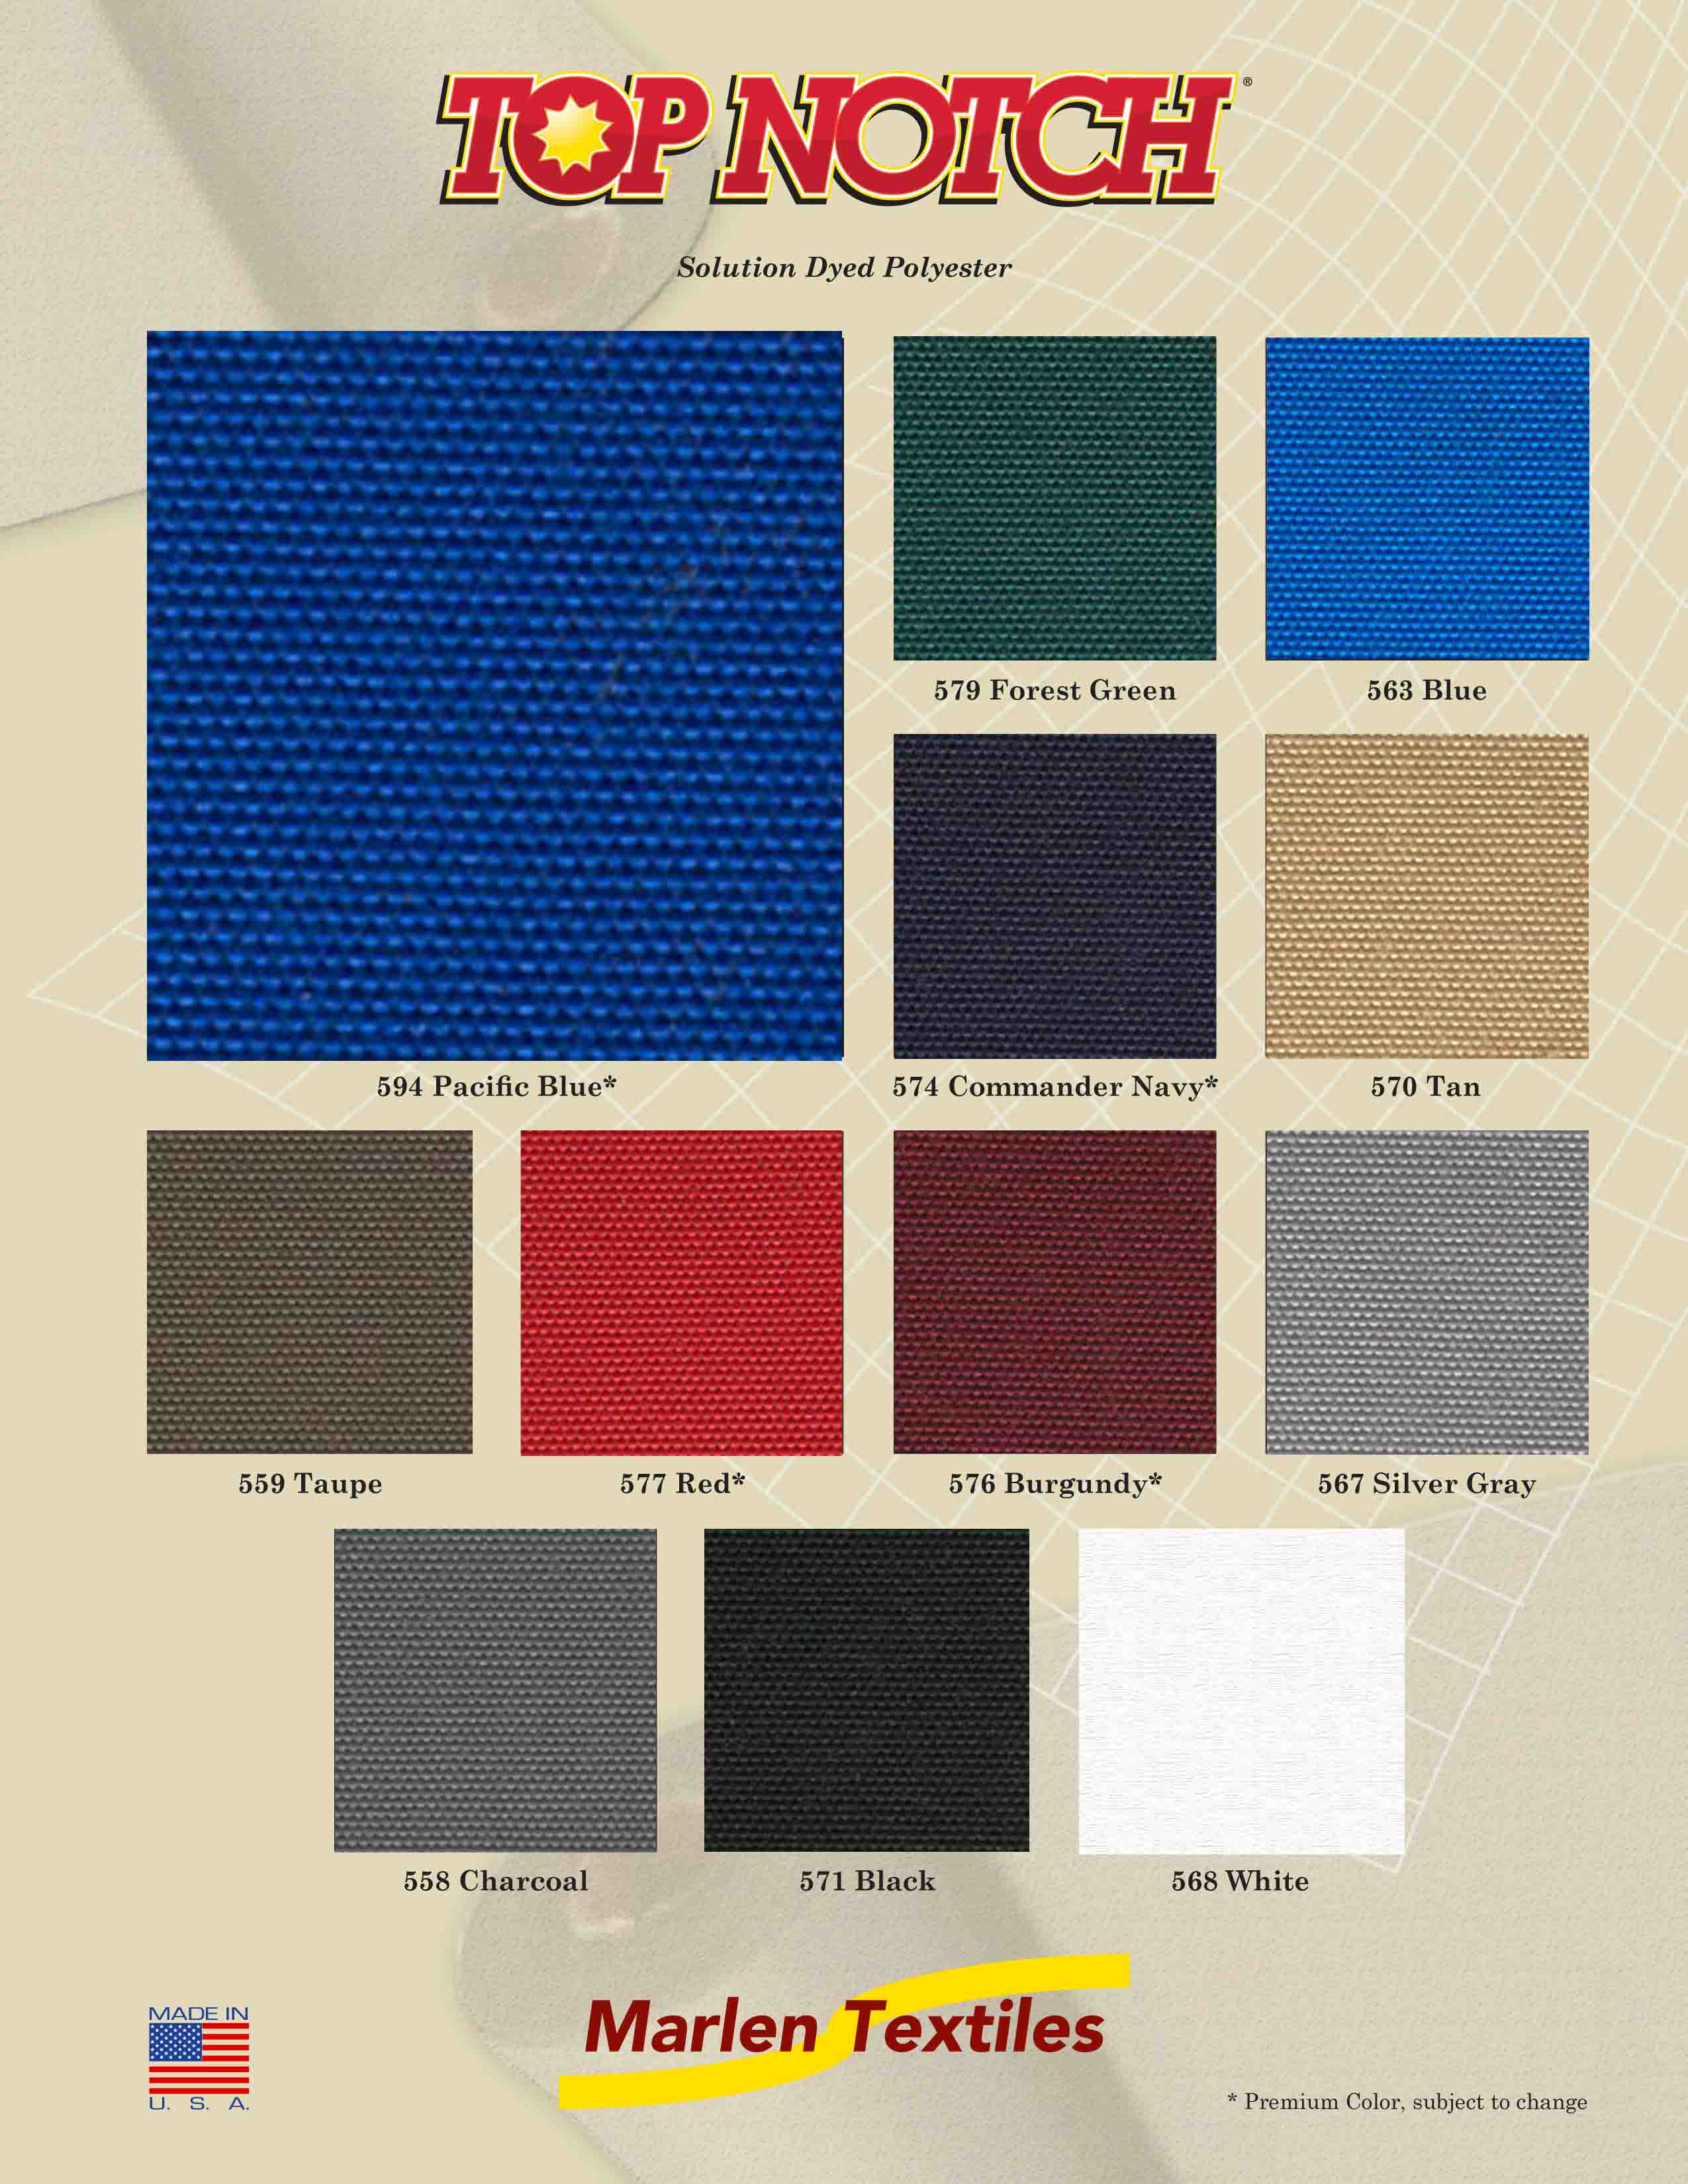 Marlen Textiles | Top Notch Solution Dyed Polyester Fabric Colors for ...